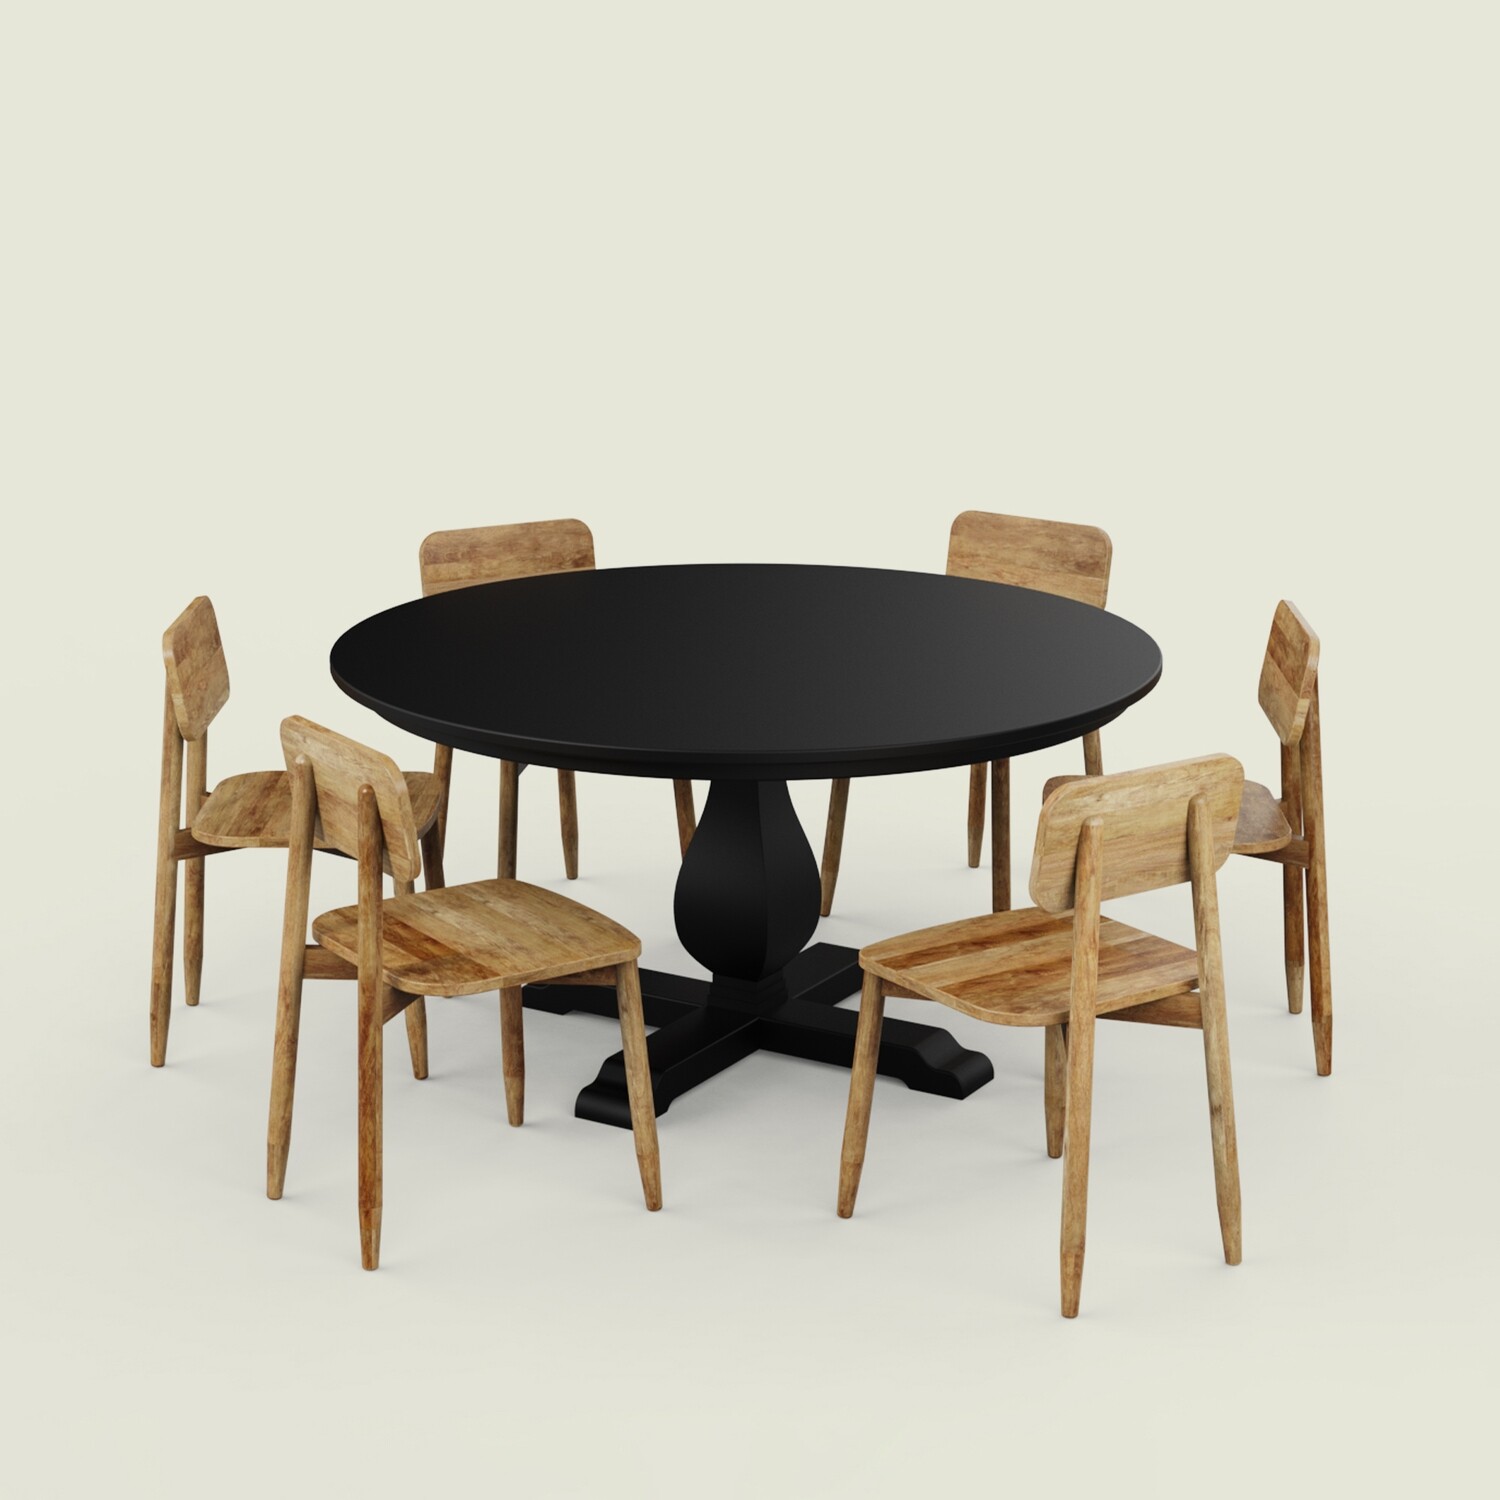 Derbyshire Black Luxury Dining Table Set with Stig Chairs - 6 Seater/150 cm